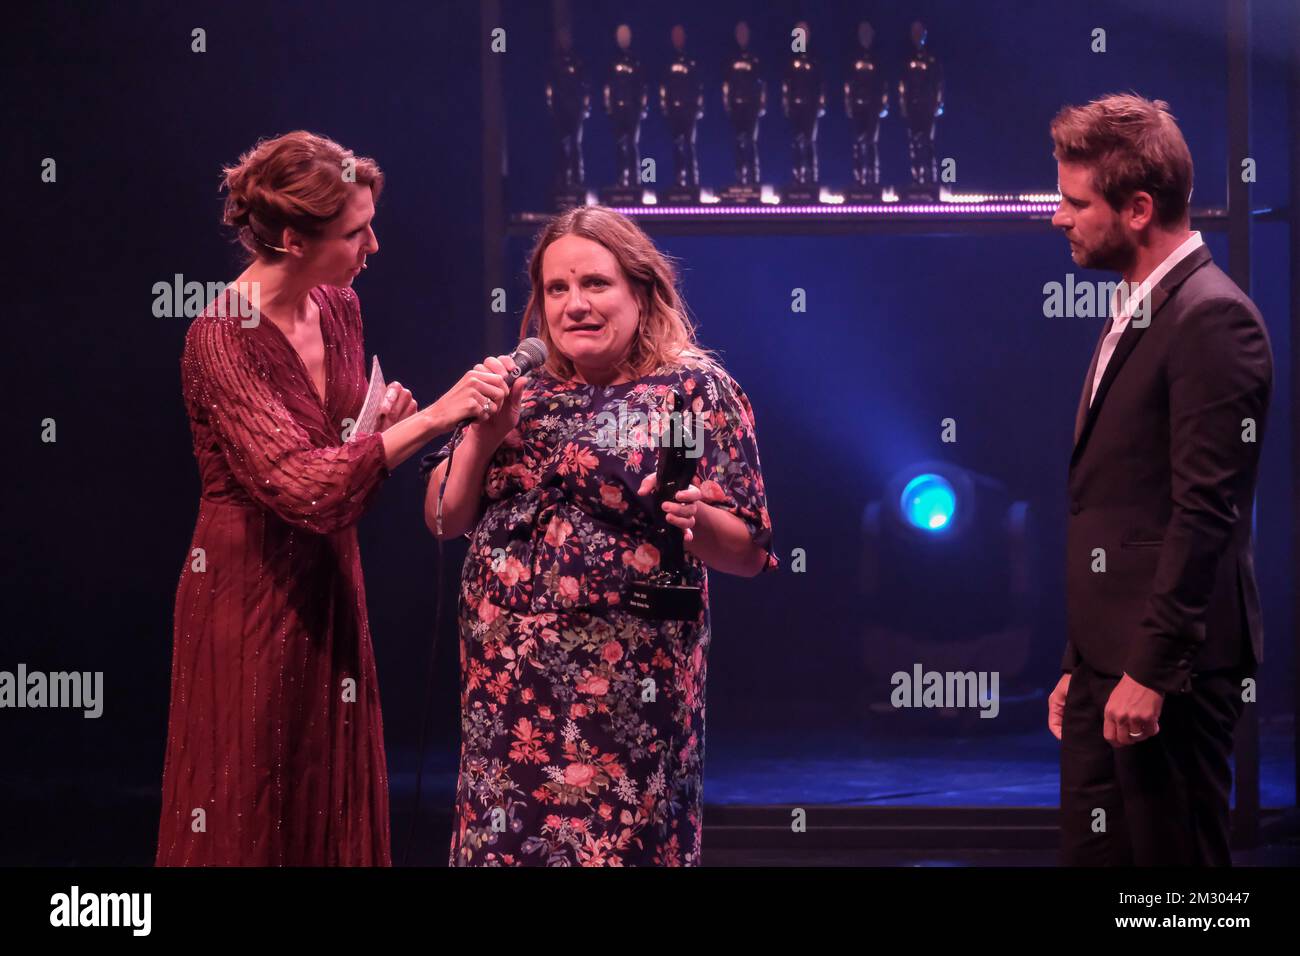 Fransesca Van Thielen, Ruth Beeckmans and Actor Kevin Janssens pictured during the award ceremony of the Ensors Flemish film prizes on the closing day of the 13th edition of the Oostende Film festival, Saturday 14 September 2019. BELGA PHOTO NICOLAS MAETERLINCK  Stock Photo